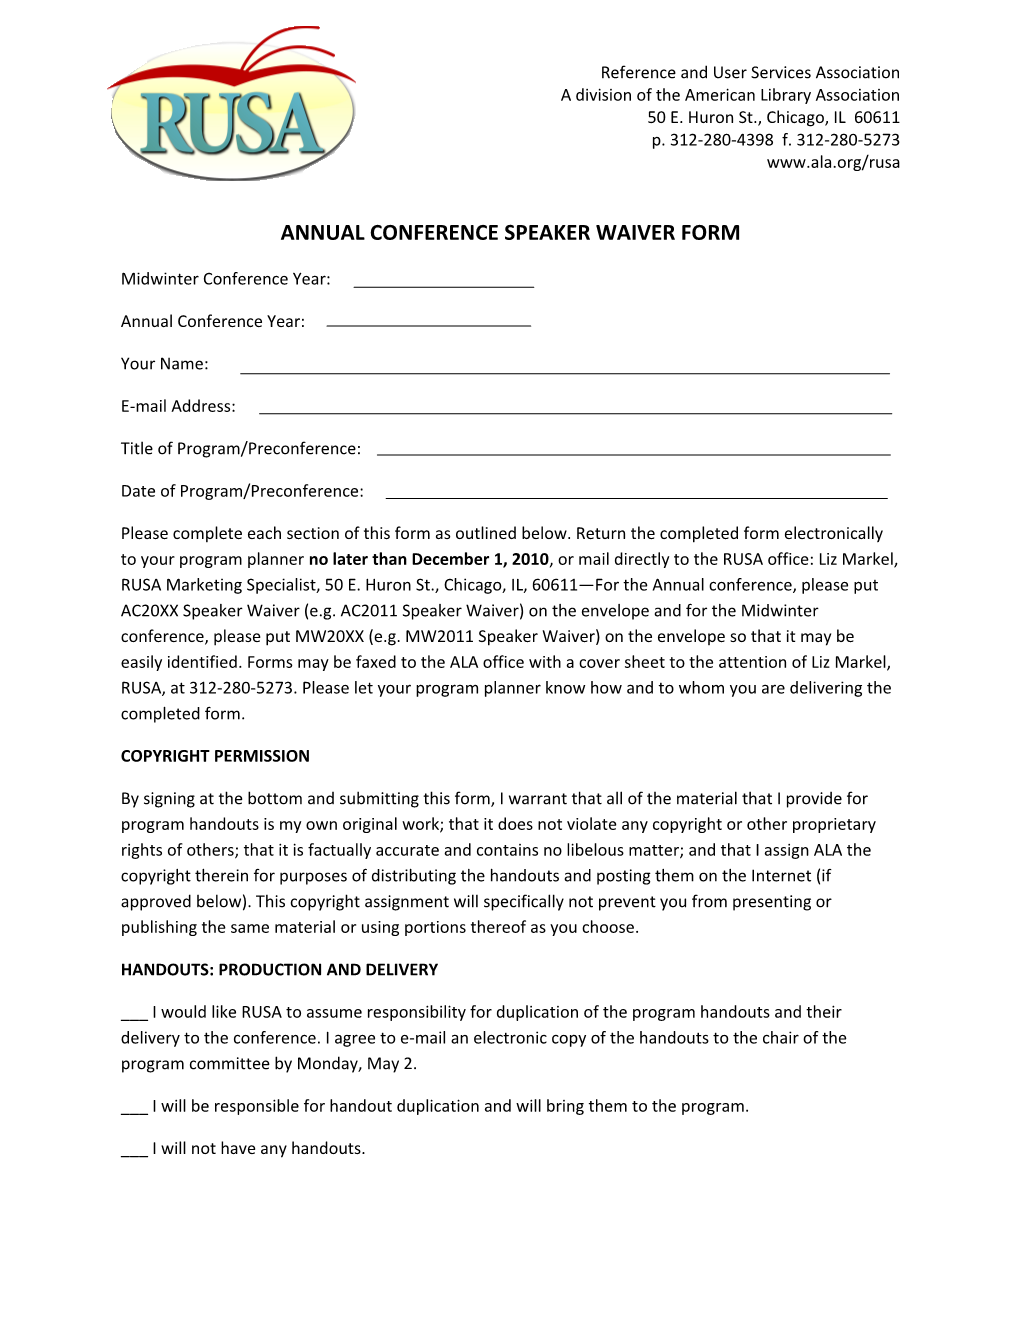 2010 Annual Conference Speaker Waiver Form